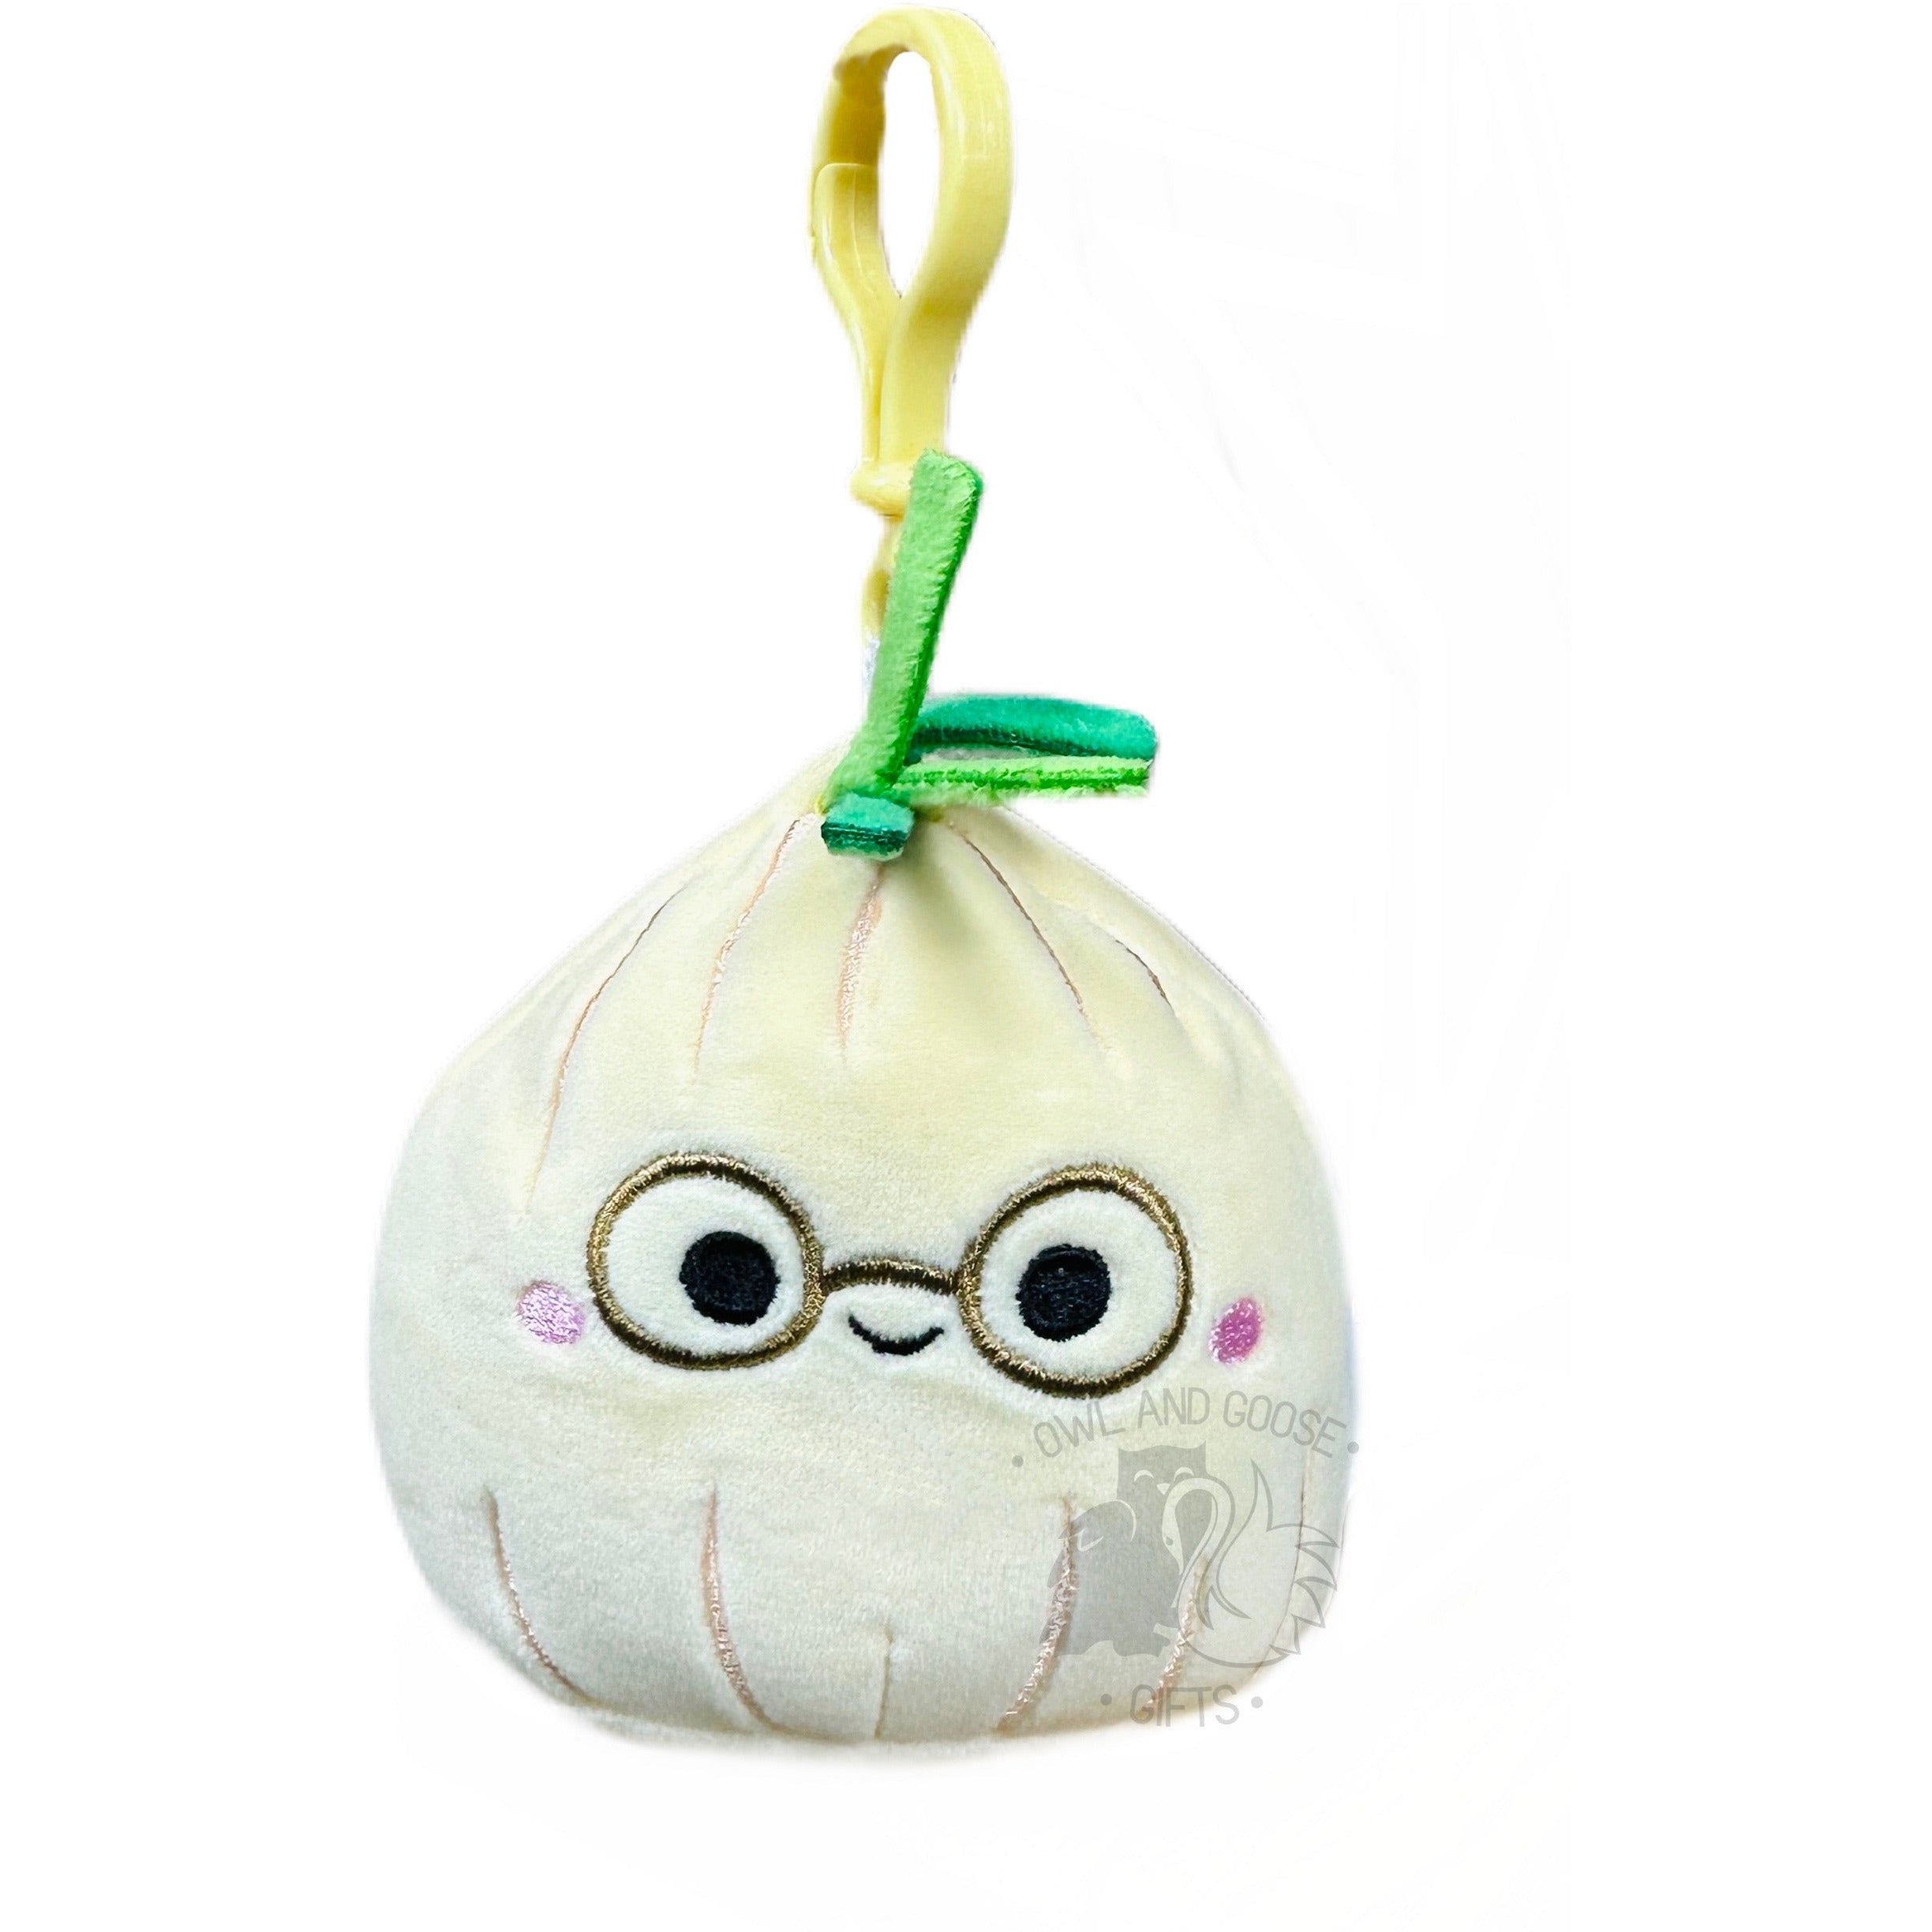 Squishmallows Official Kellytoy 3.5 Clip On Isolde the Onion Plush Toy S3  #1794